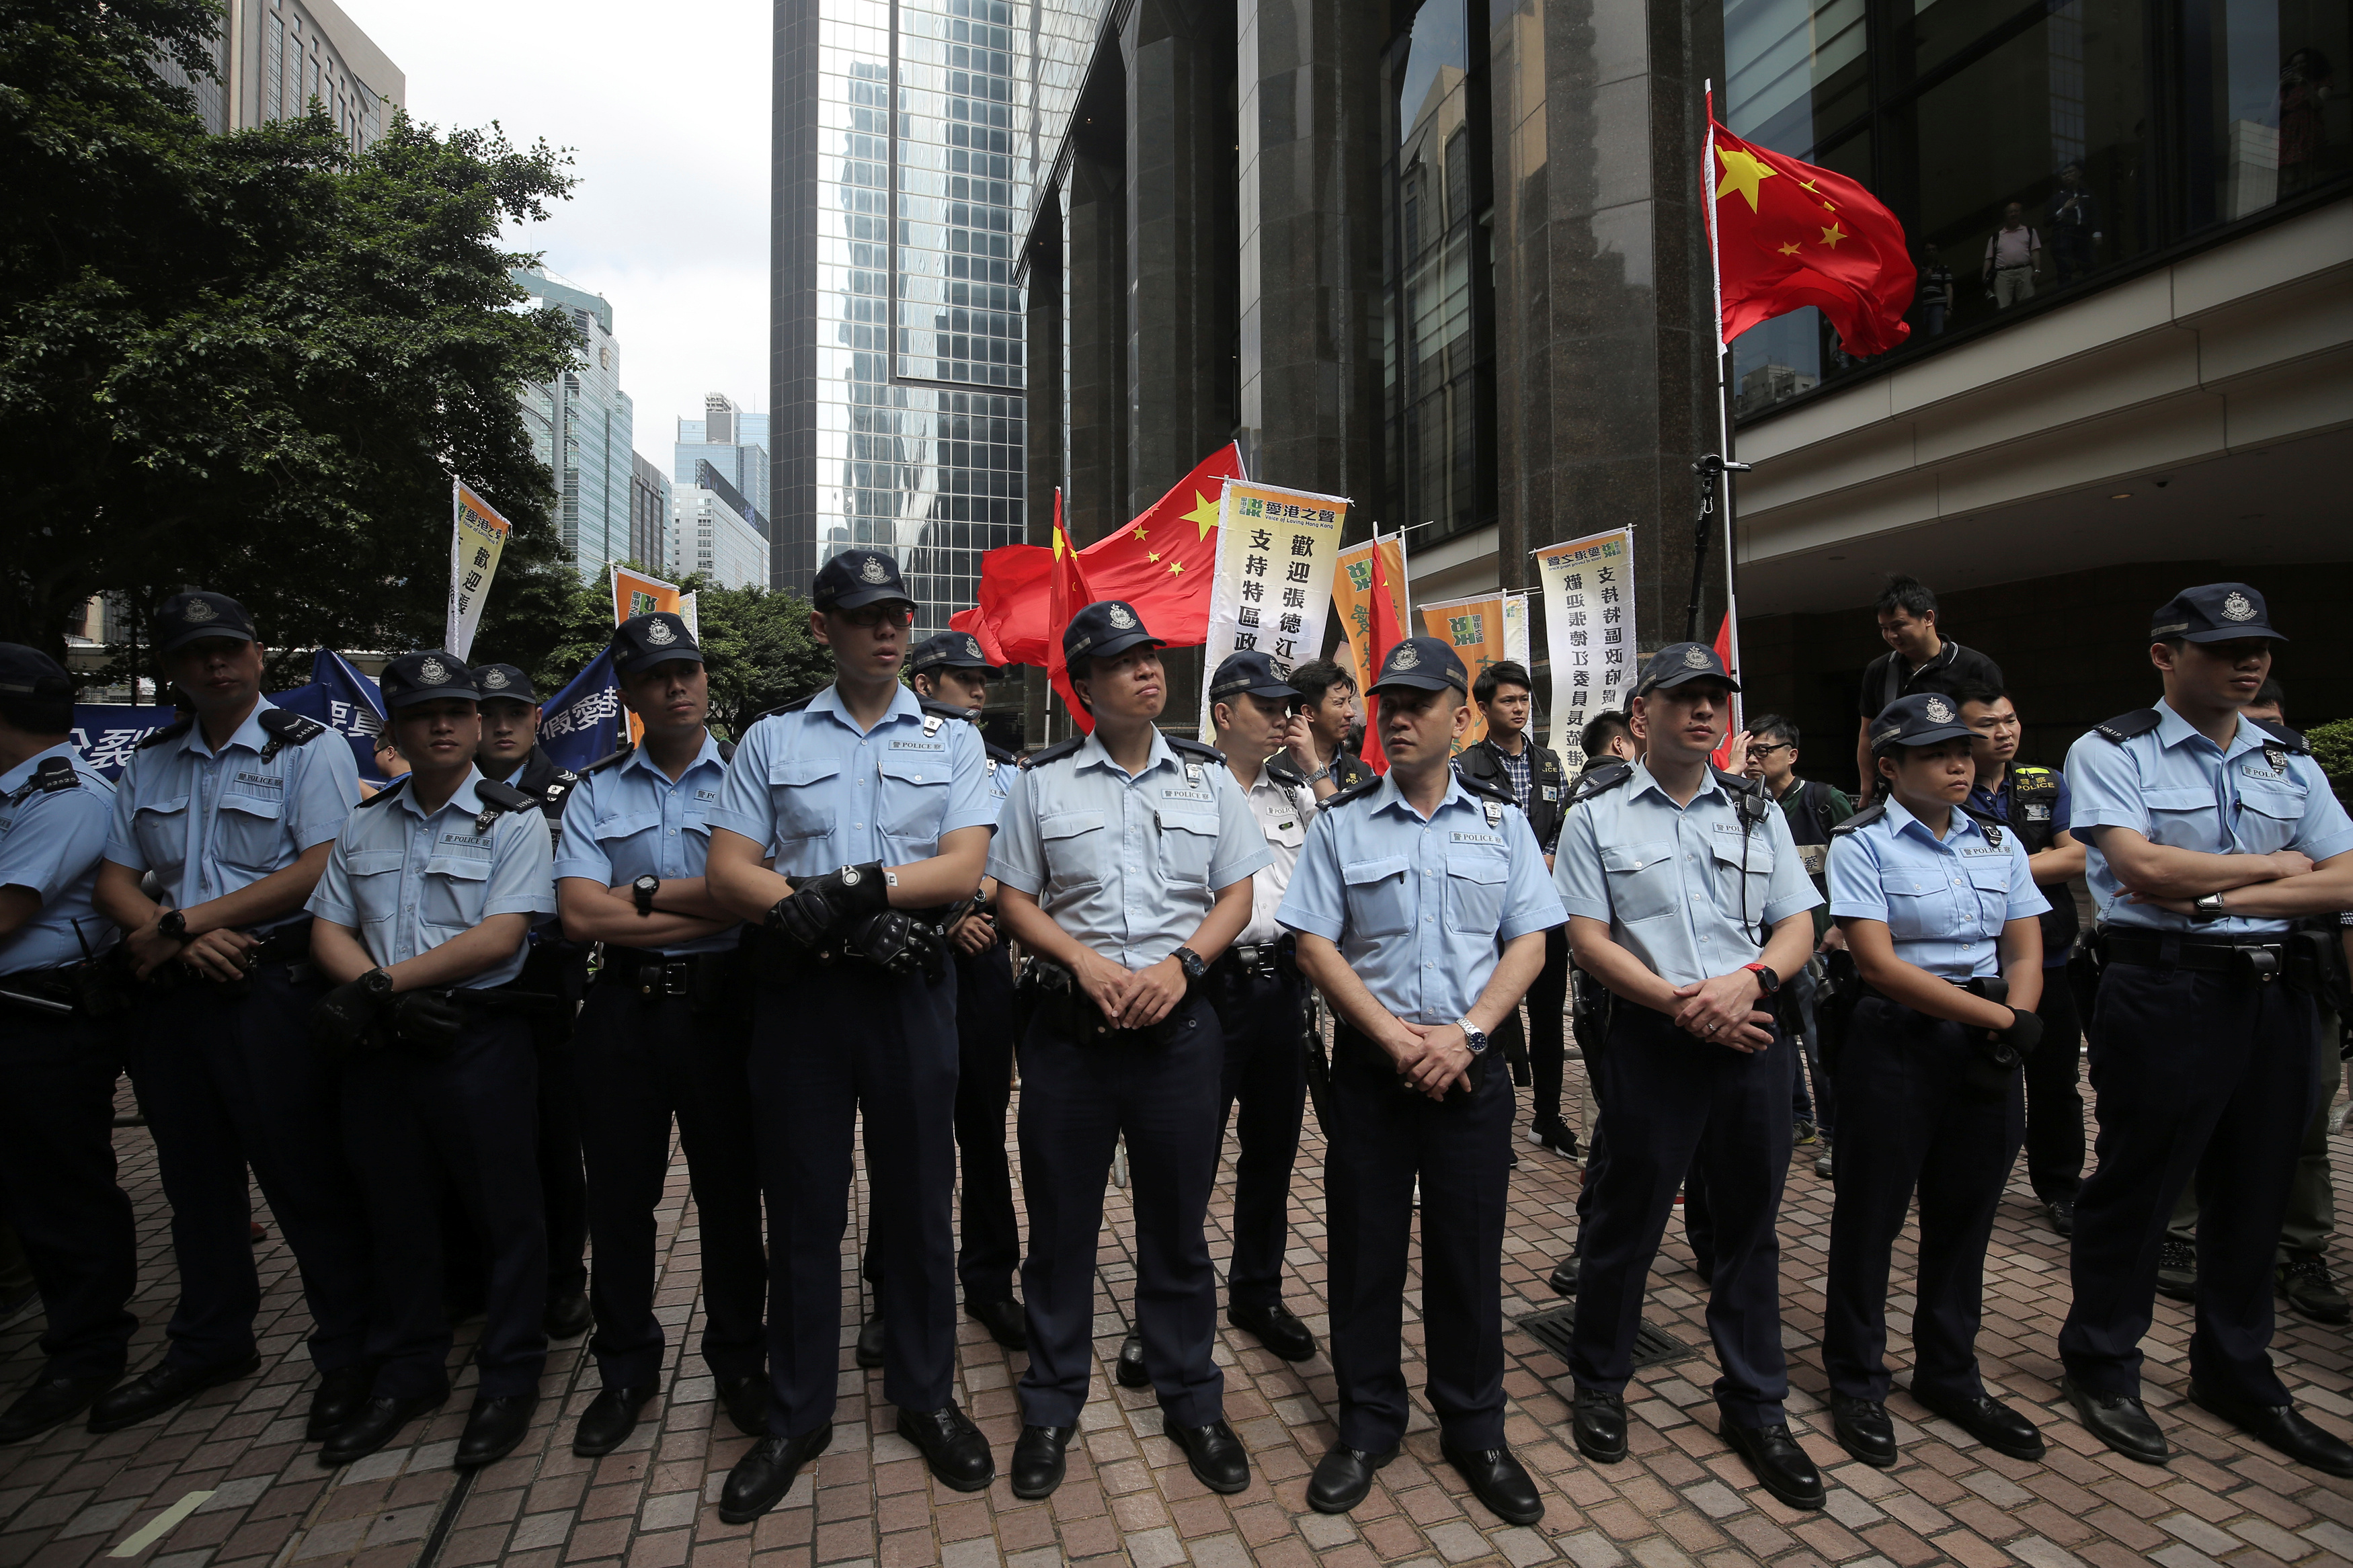 Police officers patrol in front of supporters of visiting Zhang Dejiang, the chairman of China's National People's Congress, during a protest against him in Hong Kong on May 18, 2016 (Paul Yeung—Reuters)